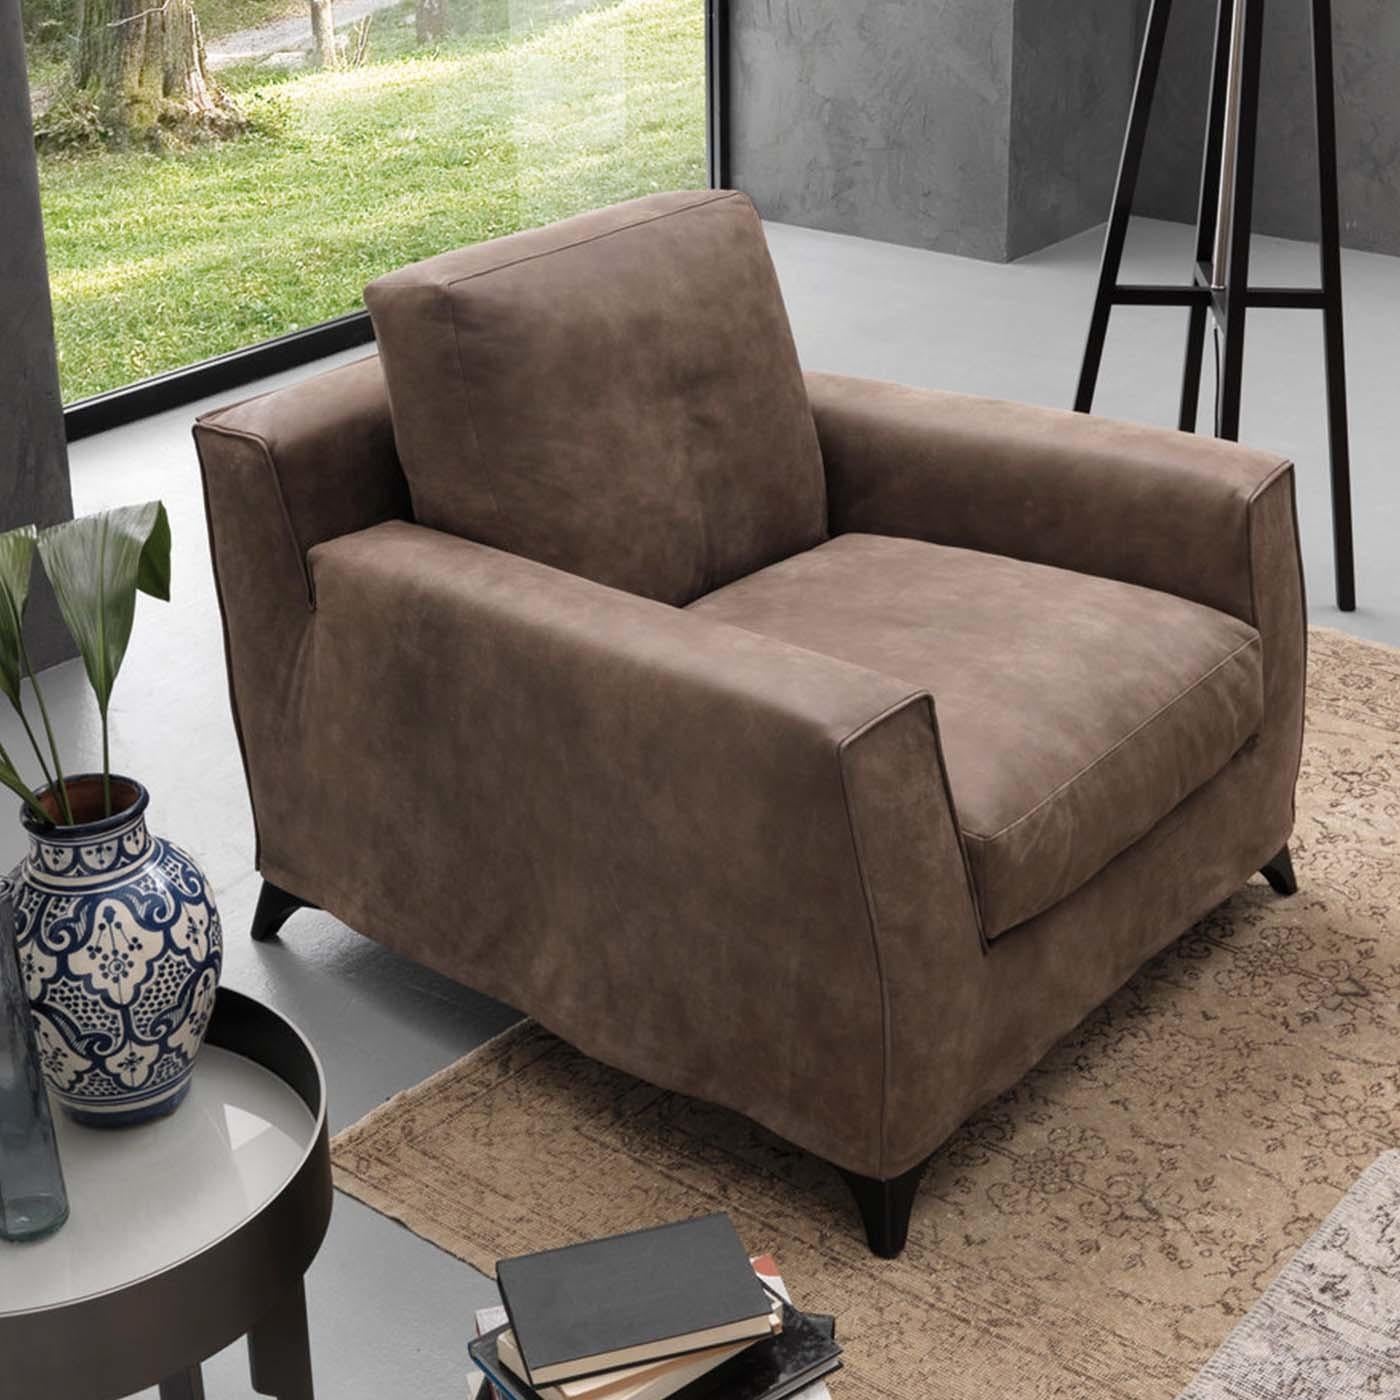 Part of the Floyd collection, this sophisticated and comfortable armchair will be a versatile addition to any decor. Its clean lines are of crush-proof polyurethane padding that covers the wooden structure, with velveteen lining and weaved-in